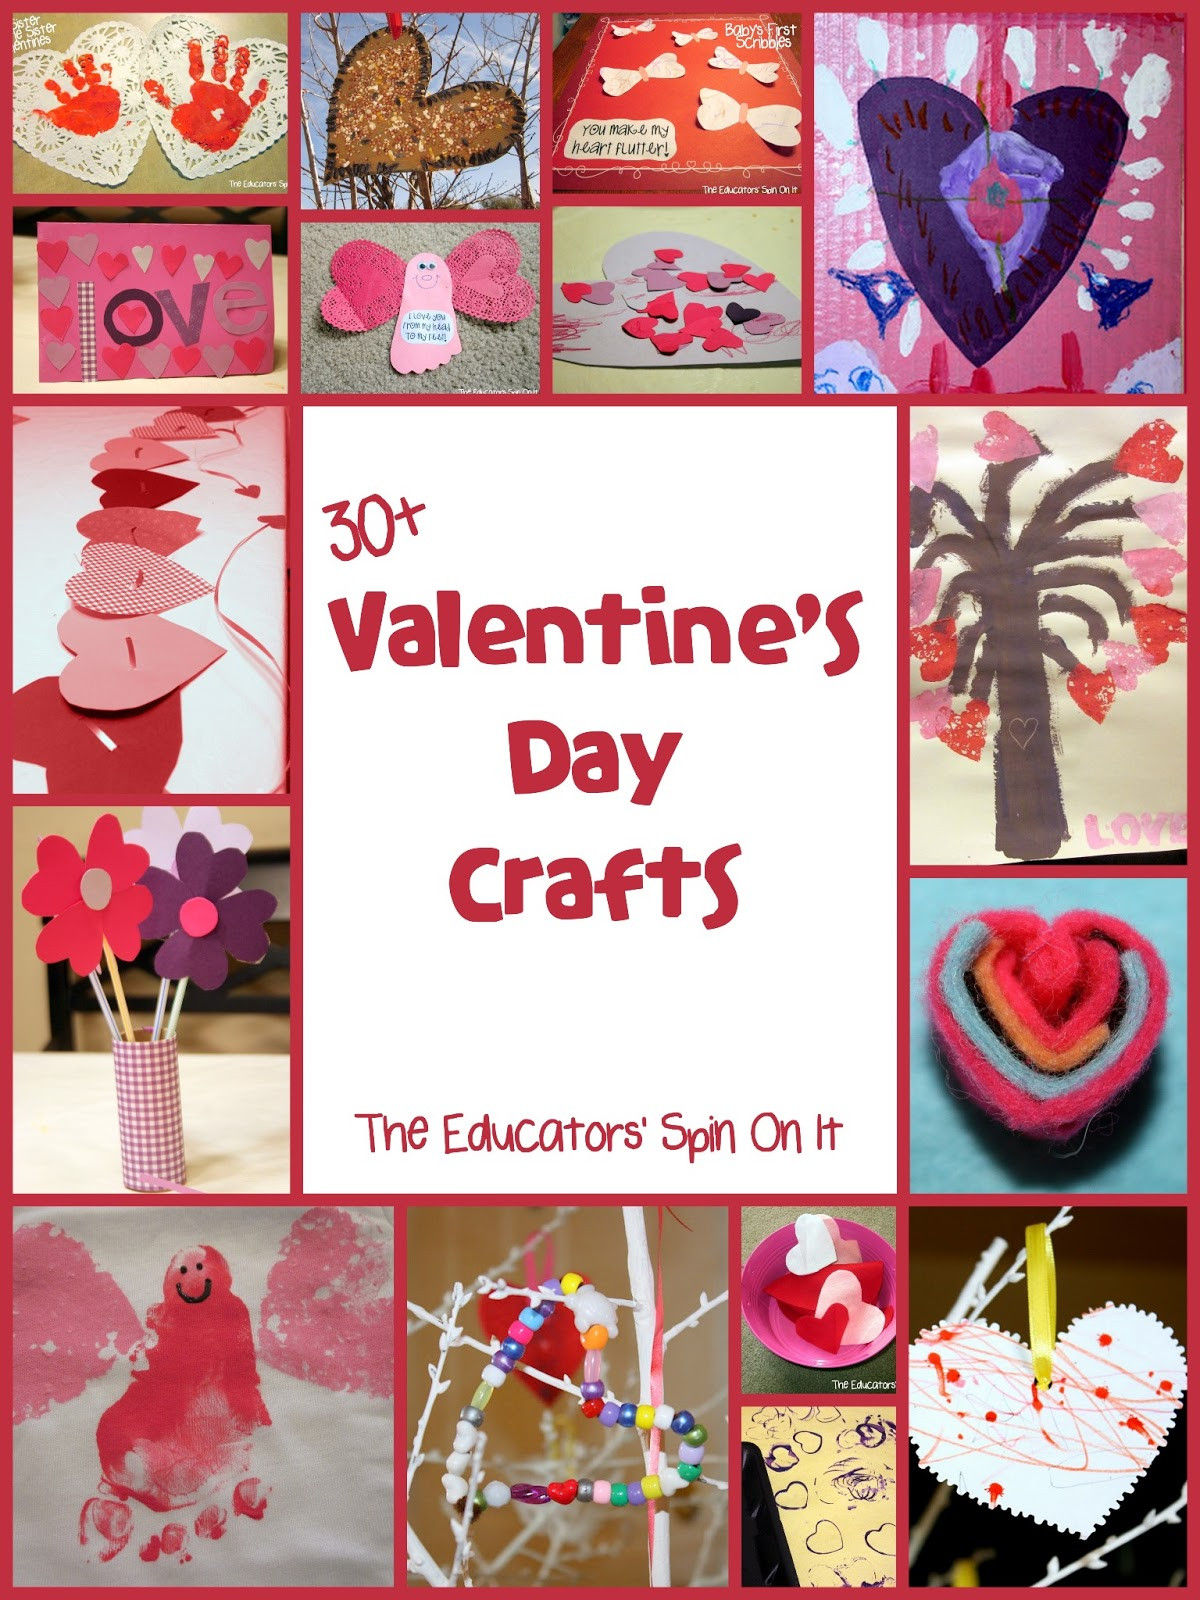 Valentines Day Activities for Kids Lovely 30 Valentine S Day Crafts and Activities for Kids the